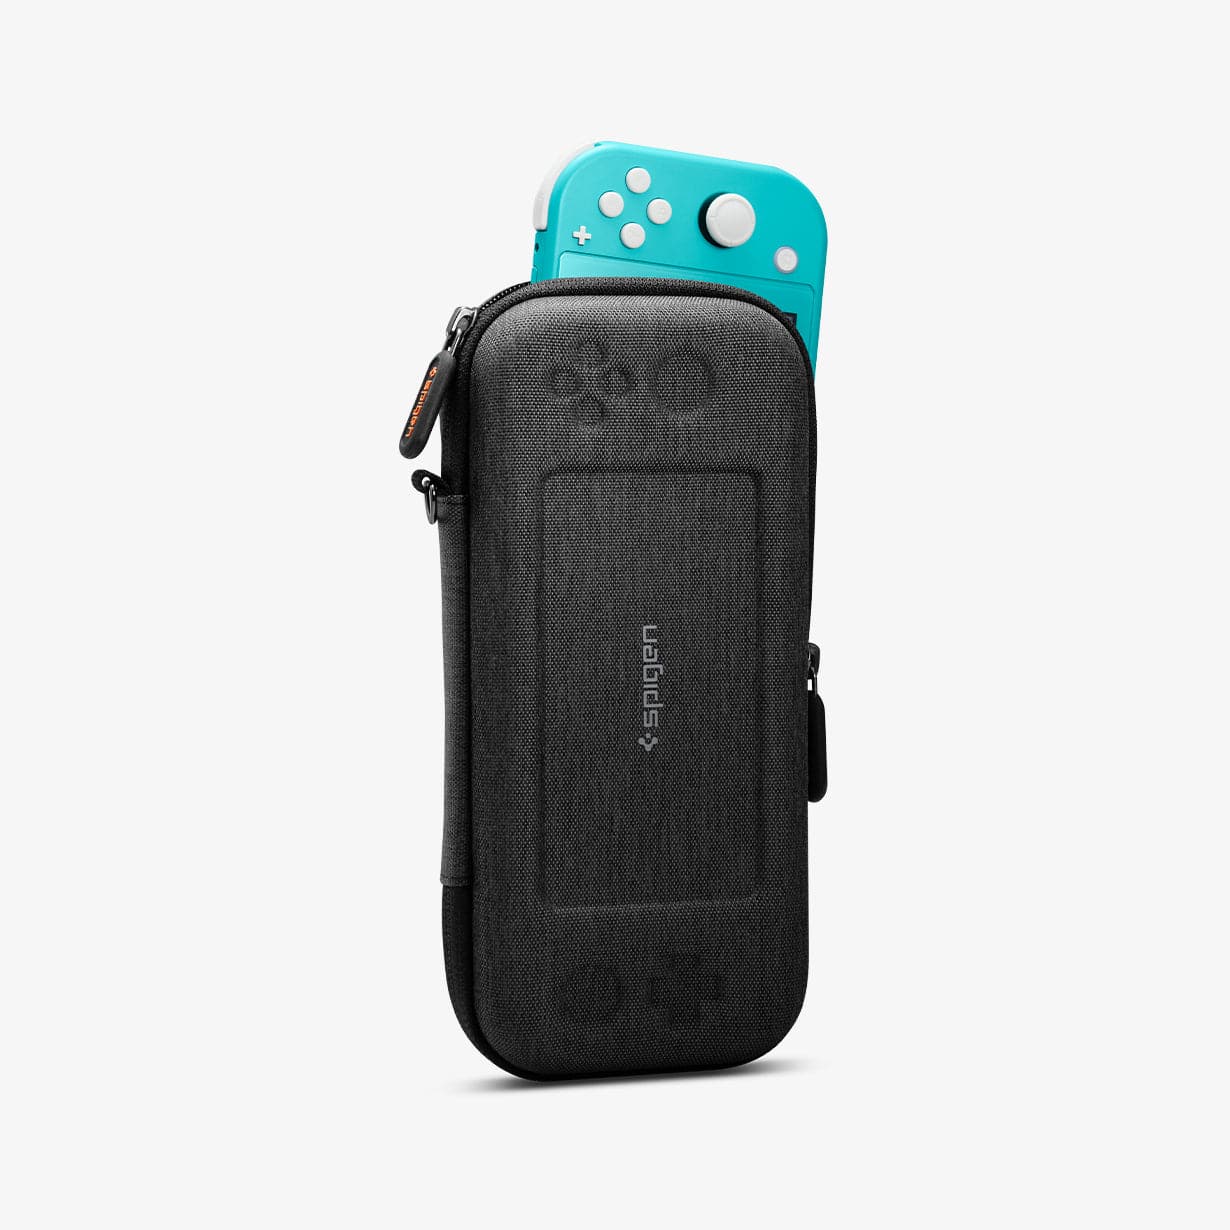 AFA00865 - Nintendo Switch Lite Case Klasden Pouch showing the front with device sticking out slightly